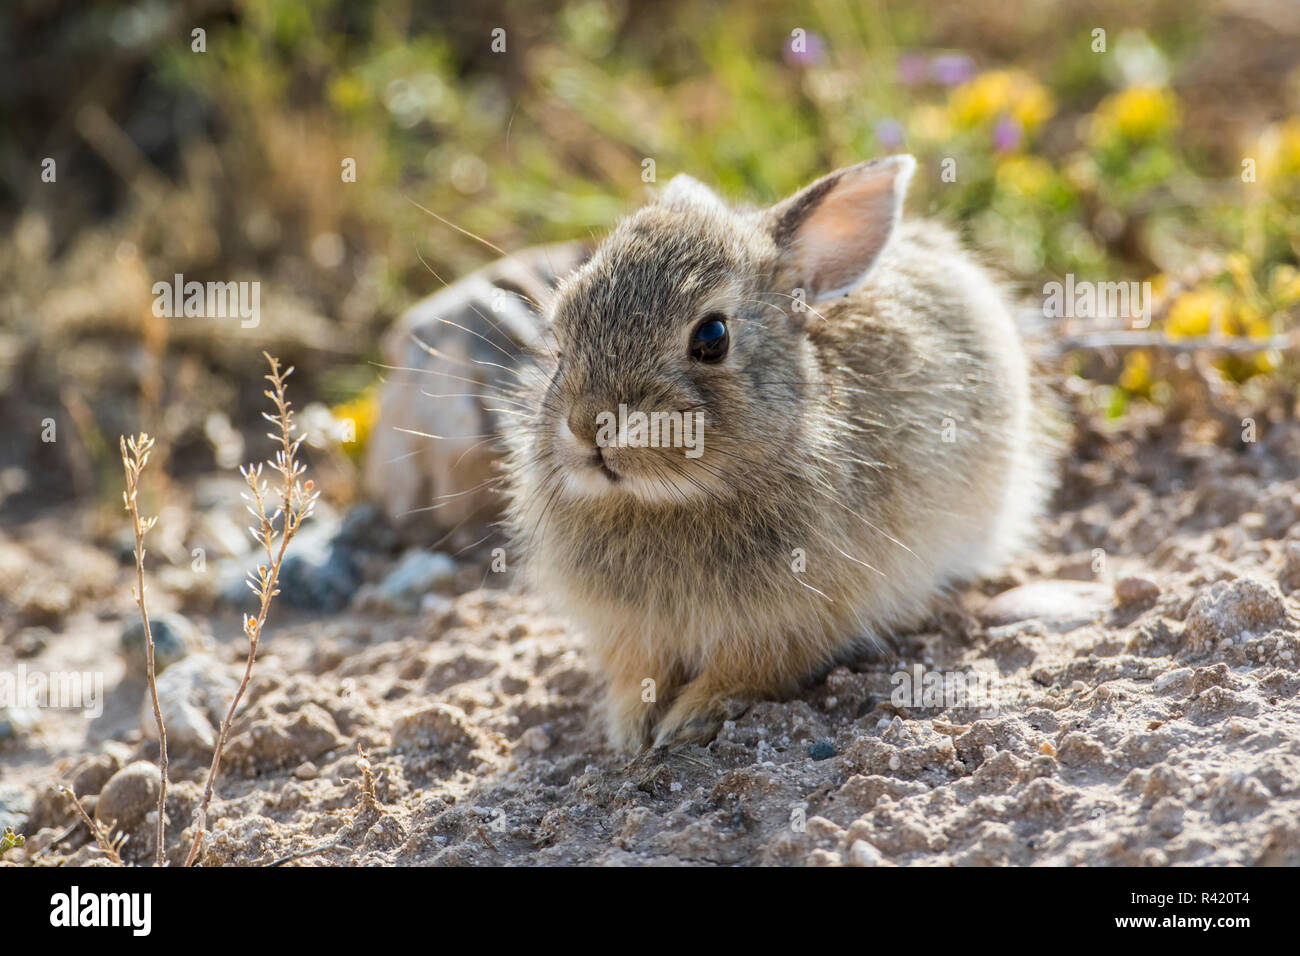 USA, Wyoming, Sublette County. Young cottontail rabbit sitting at the edge of it's burrow. Stock Photo